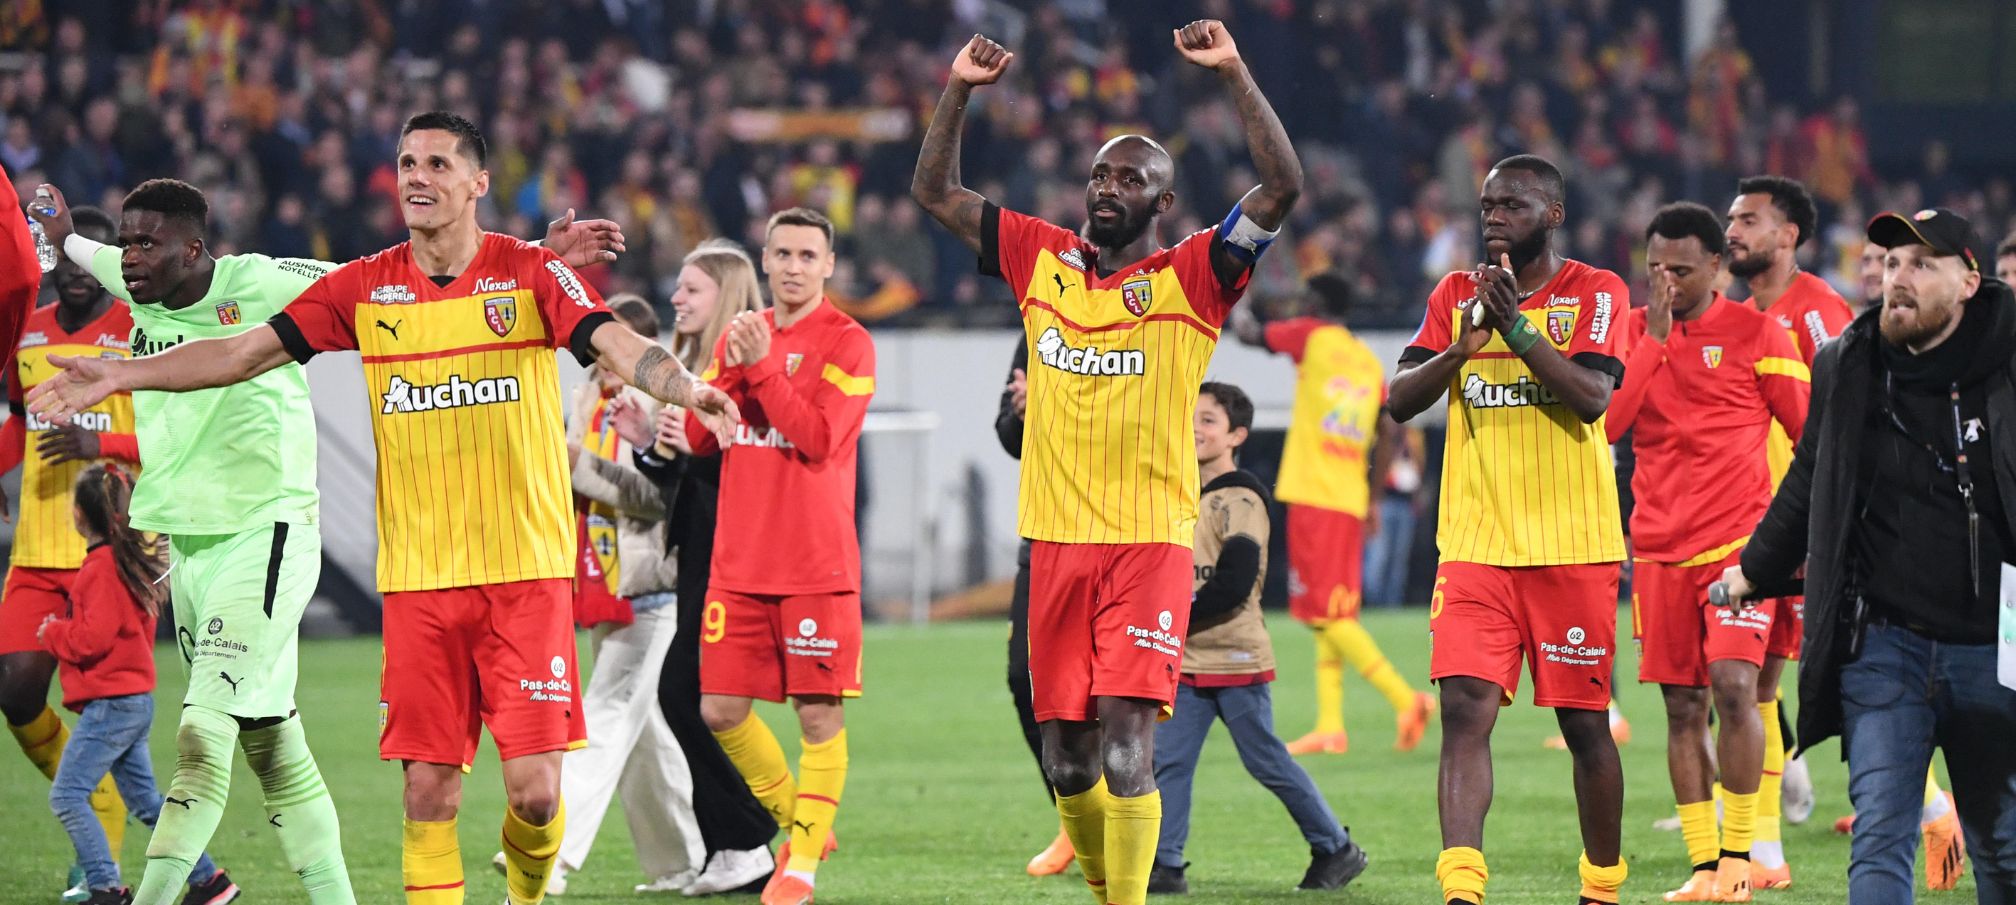 RC Lens: A remarkable journey to the Champions League 